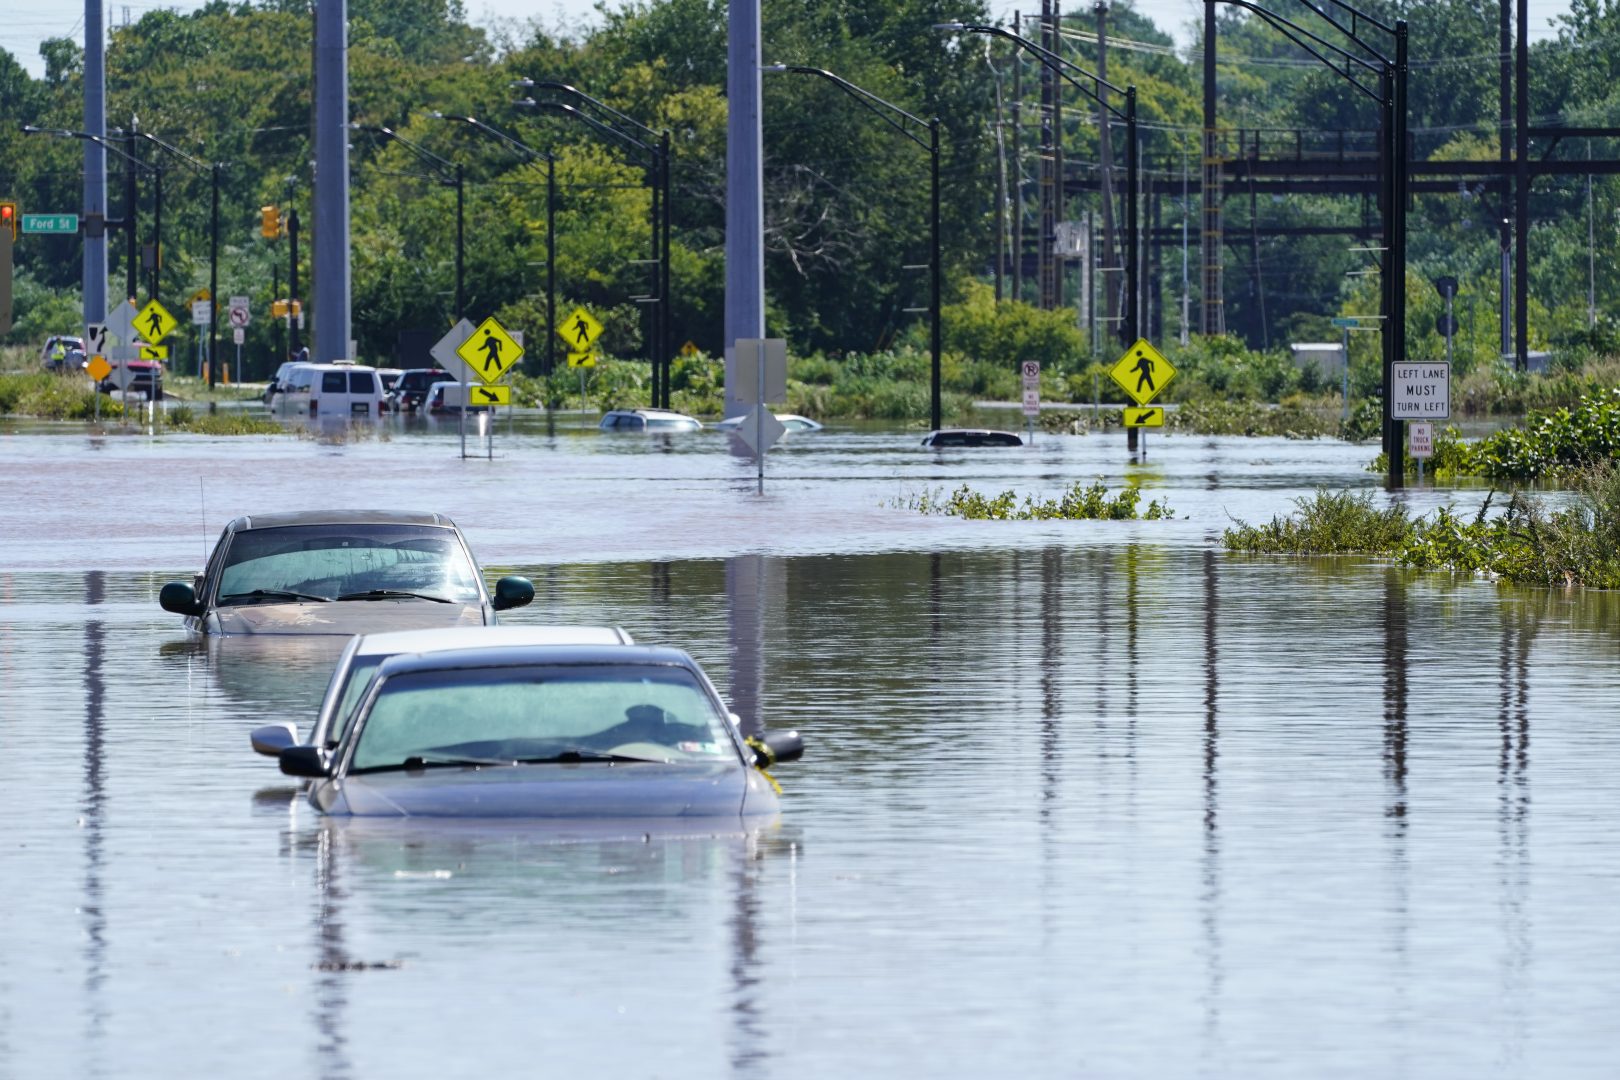 Vehicles are under water during flooding in Norristown, Pa. Thursday, Sept. 2, 2021 in the aftermath of downpours and high winds from the remnants of Hurricane Ida that hit the area. Scientists say climate change is contributing to the strength of storms like Ida.